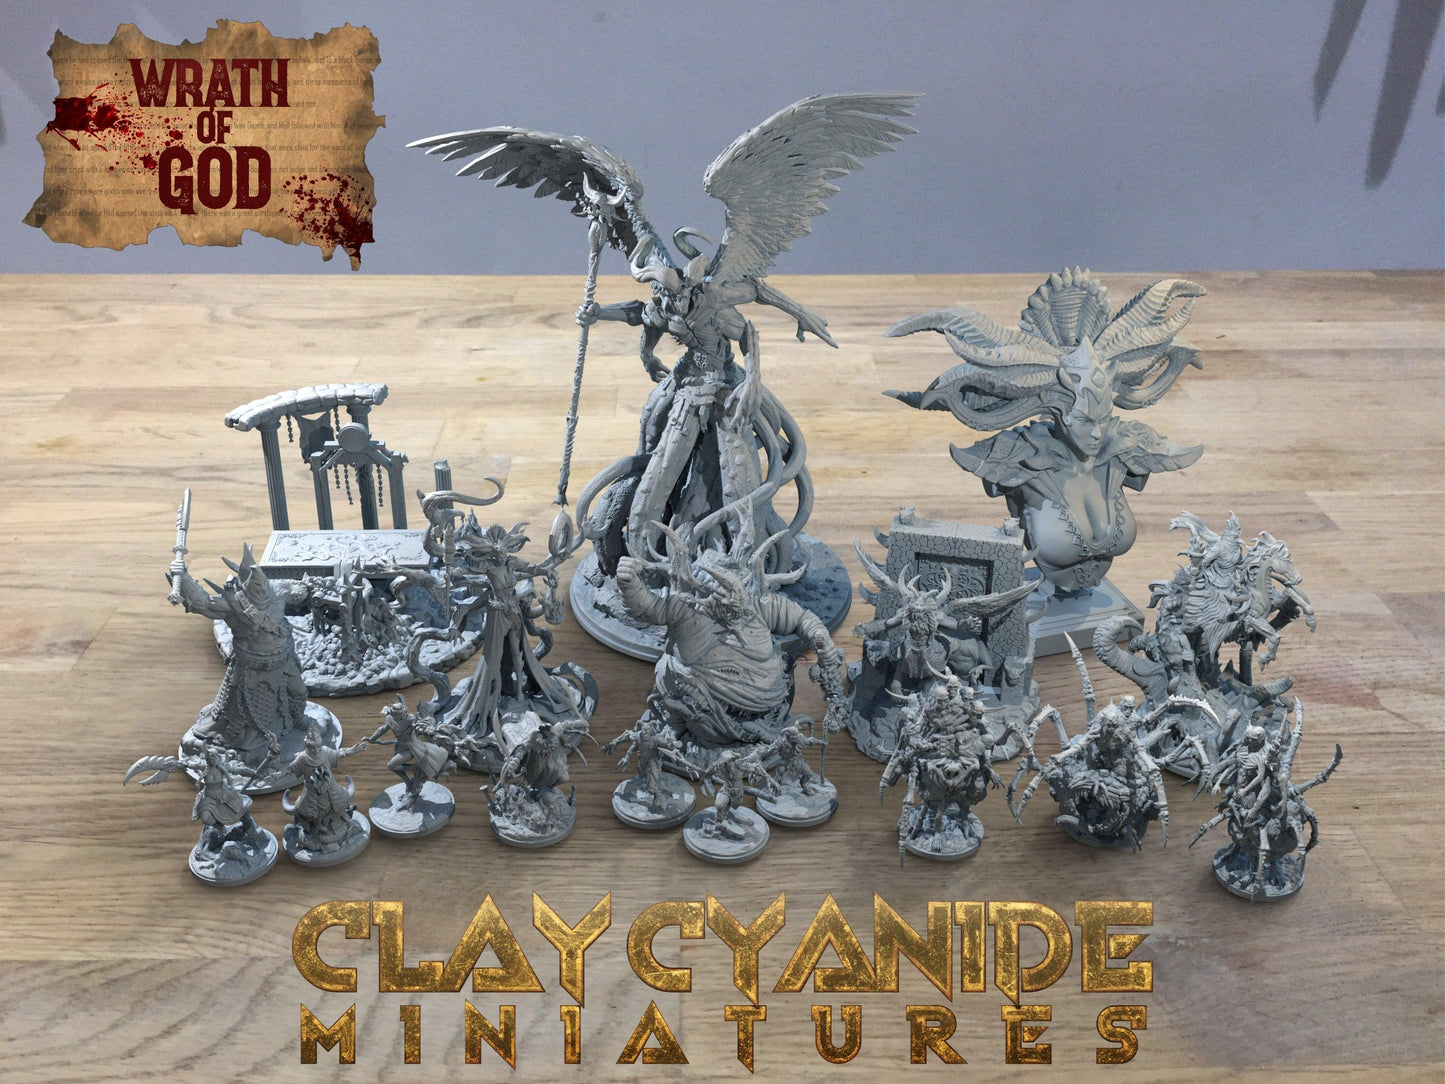 Beithir miniature | Clay Cyanide | Wrath of God | 32mm Scale | Tabletop Gaming | DnD Miniature | Dungeons and Dragons, DnD 5e - Plague Miniatures shop for DnD Miniatures